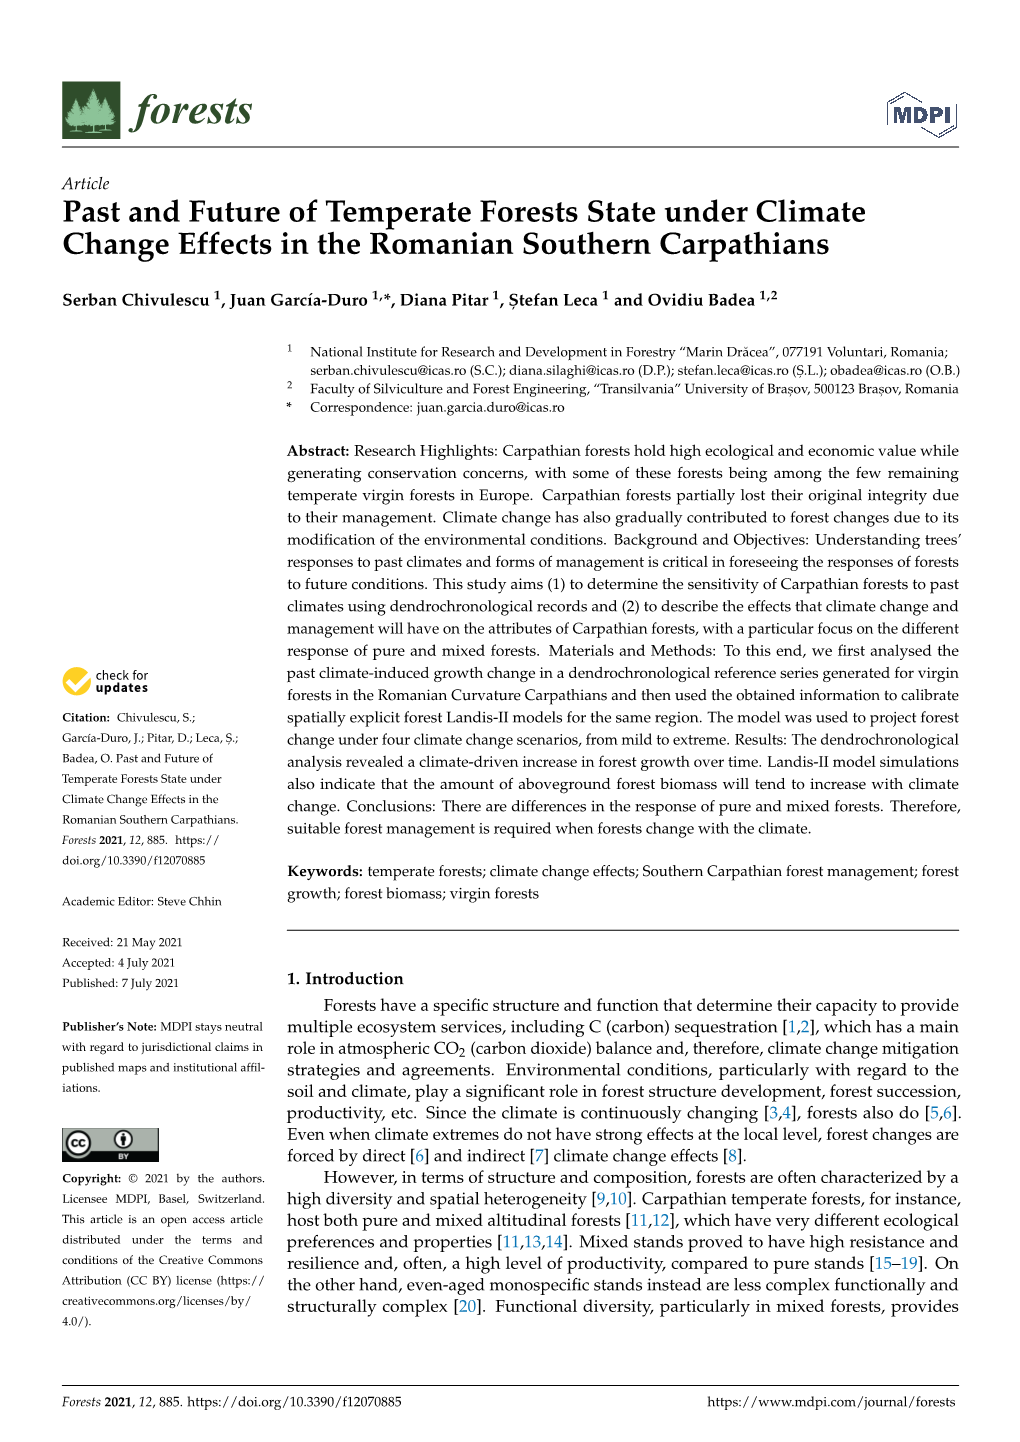 Past and Future of Temperate Forests State Under Climate Change Effects in the Romanian Southern Carpathians